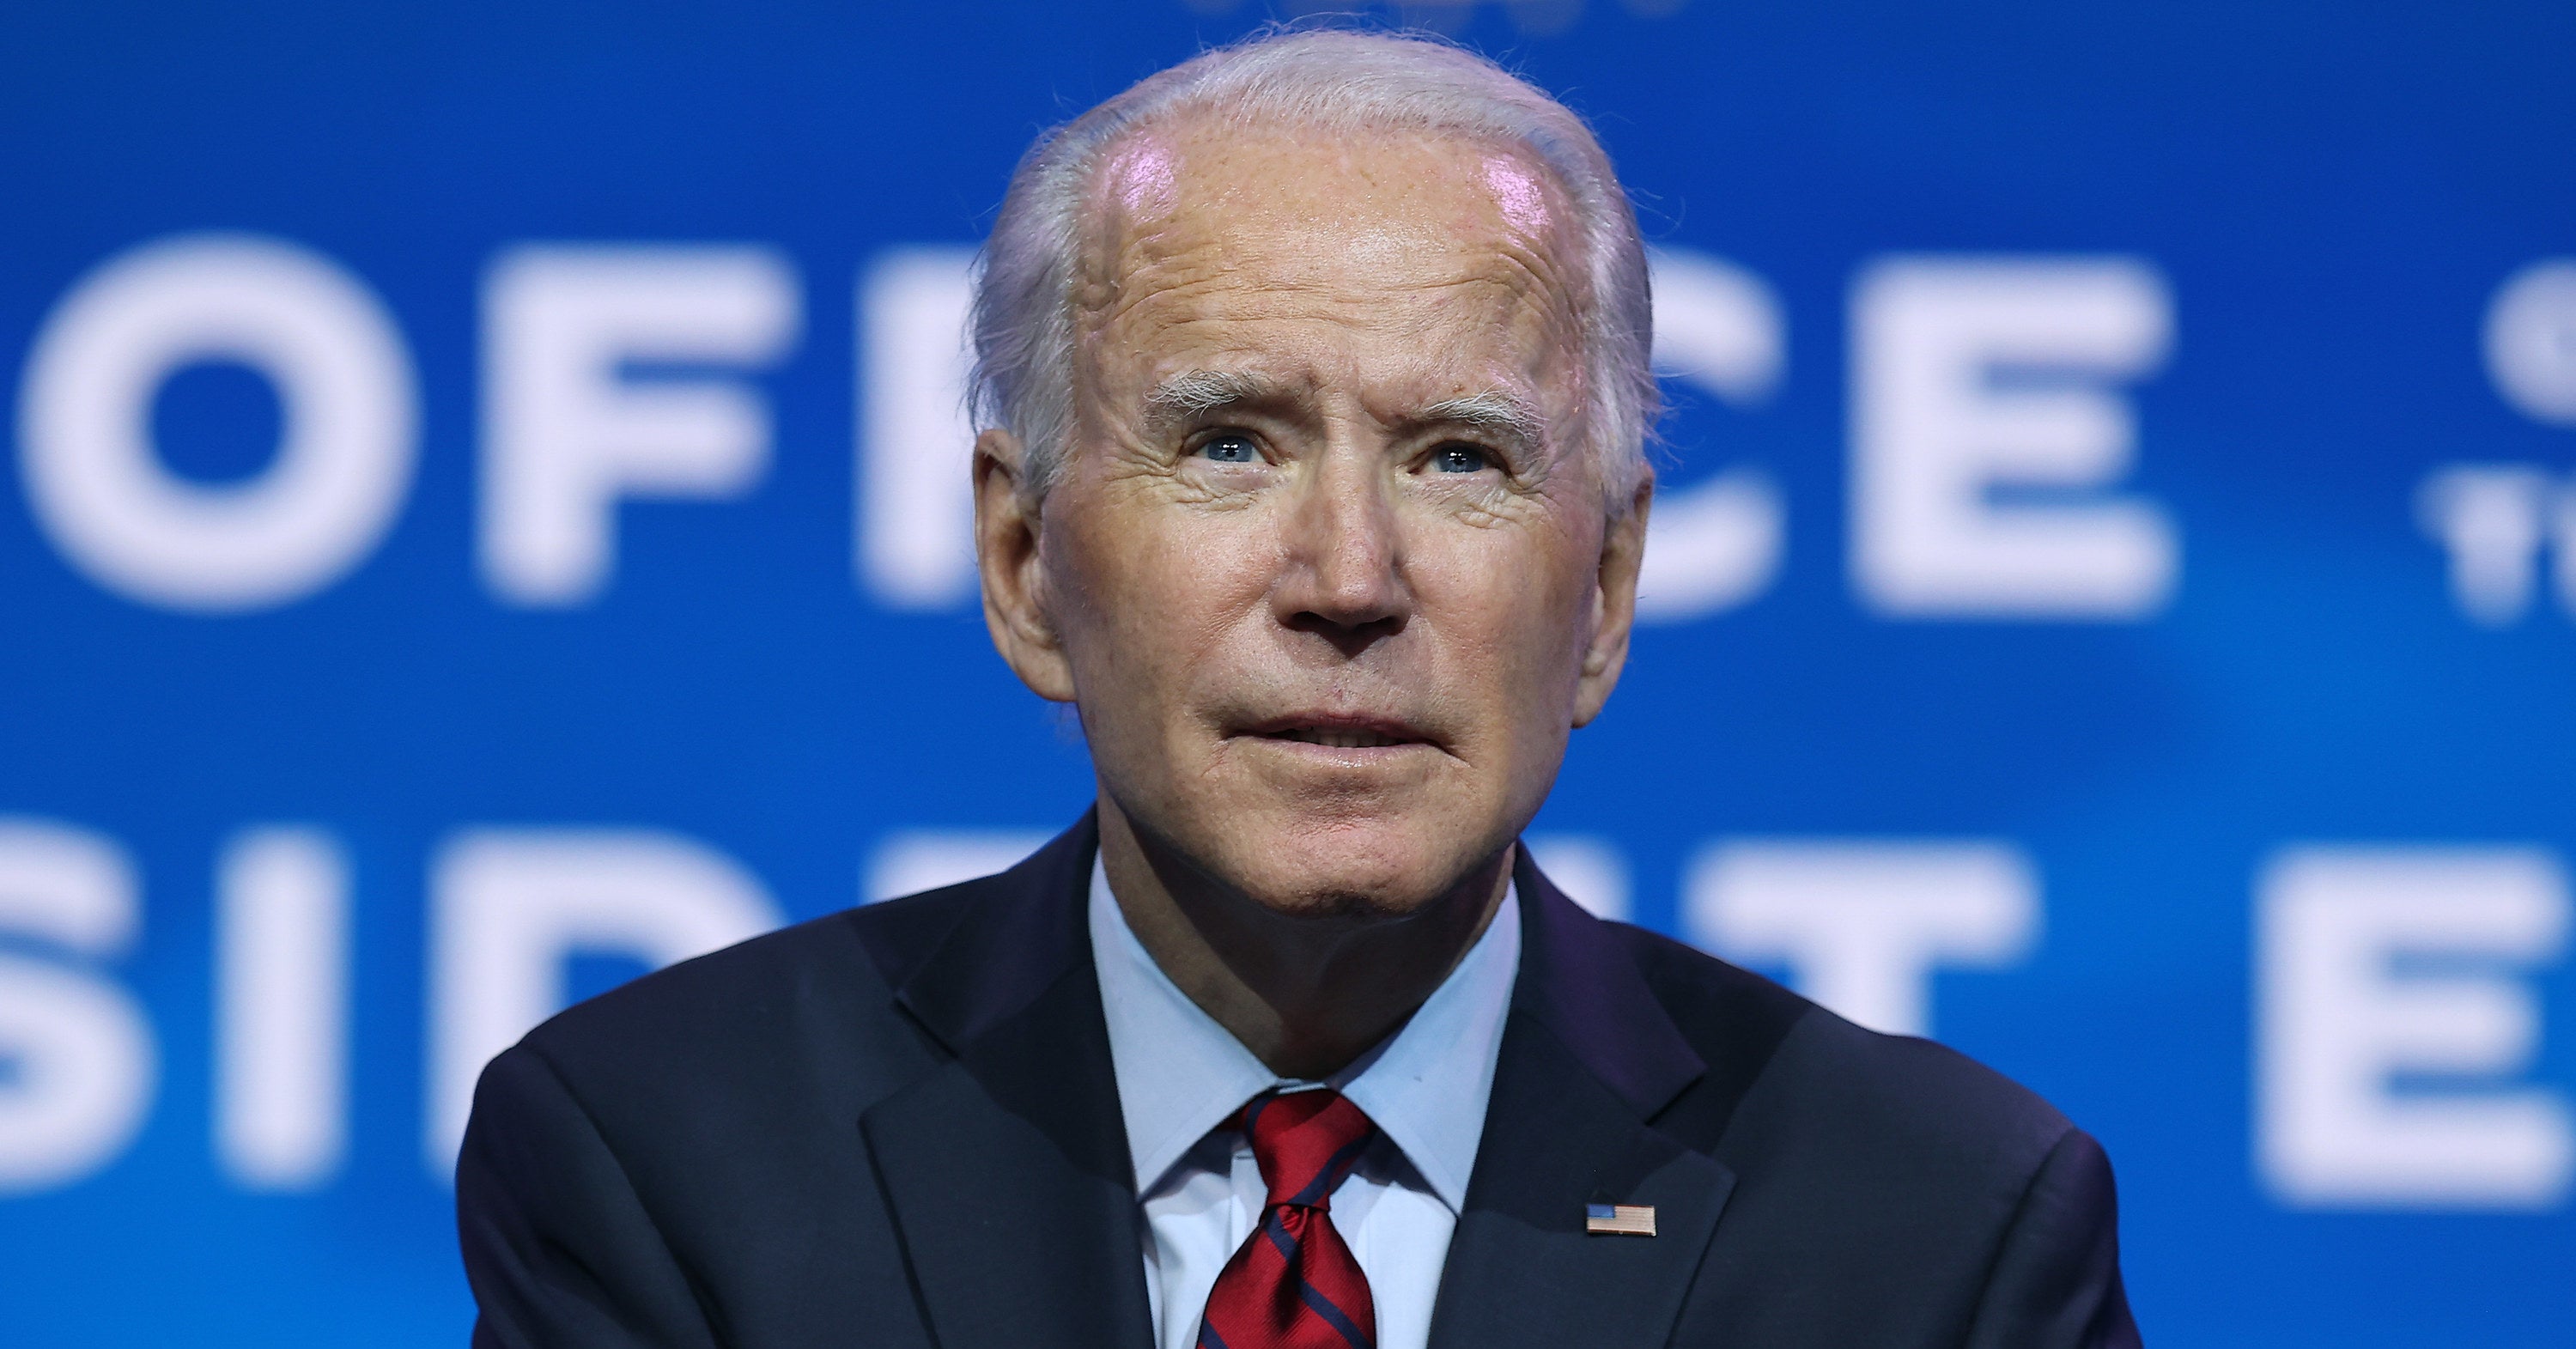 Biden Plans To Give 50 Million Americans COVID-19 Vaccinations In His First 100 Days